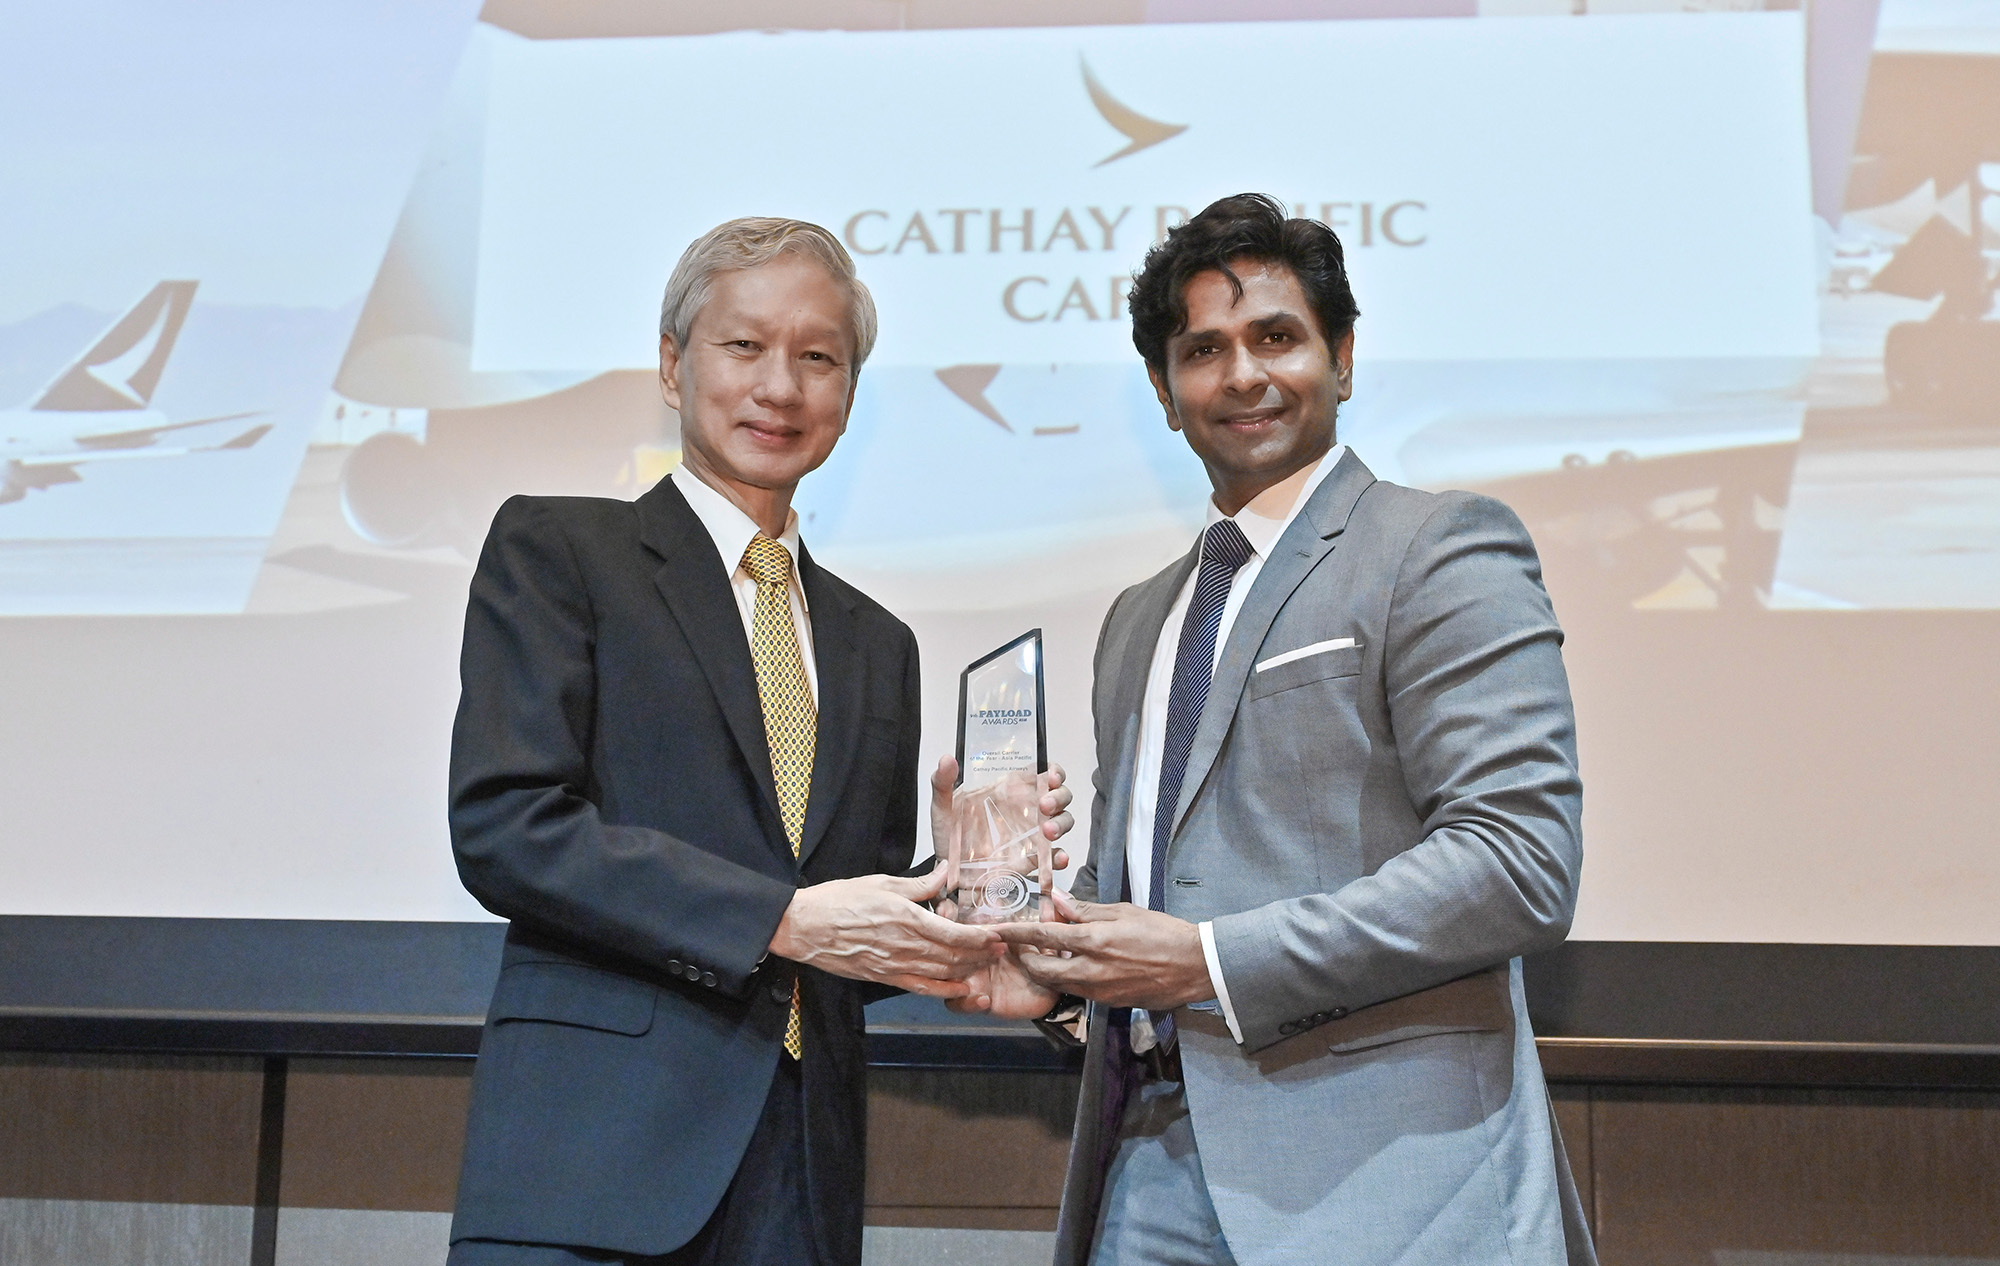 Siddhant Iyer, Regional Head of Cargo, Southeast Asia accepting payload Asia award on behalf of Cathay Pacific Cargo